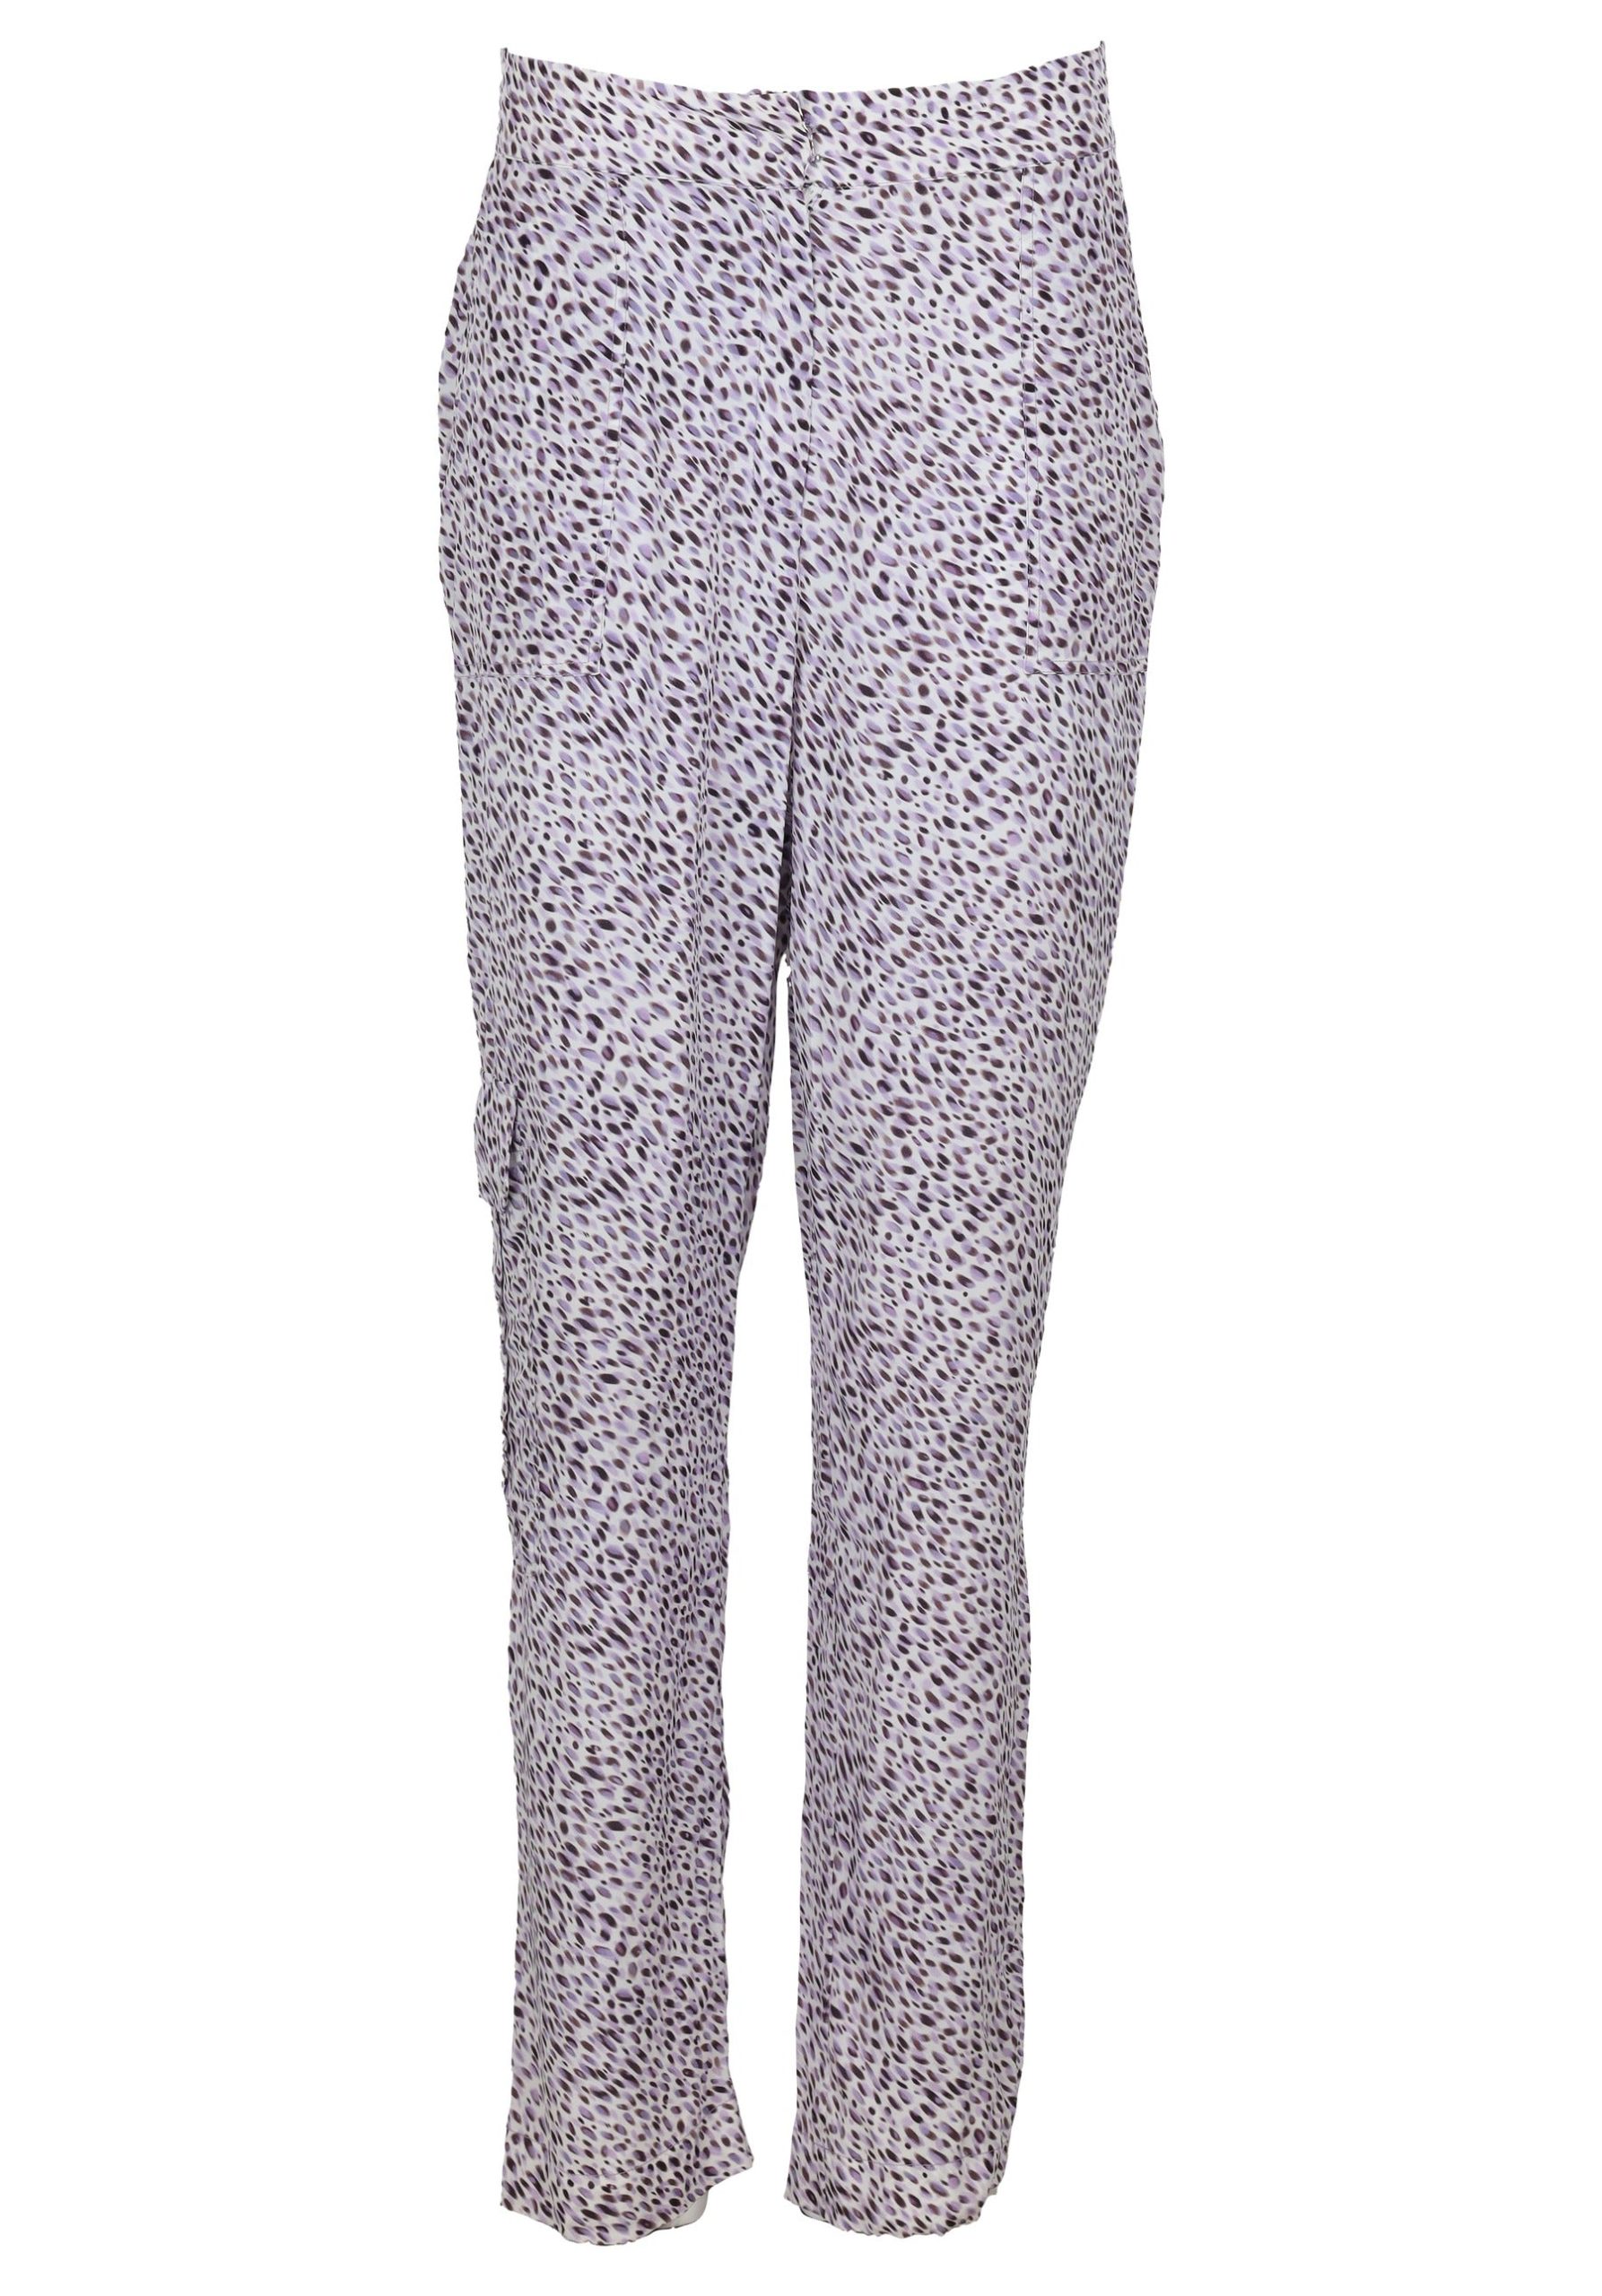 Stormy Dots White Small Damen Lala Forever Entwicklung Lala Berlin Pre-Loved Pants Palucca – L – 1